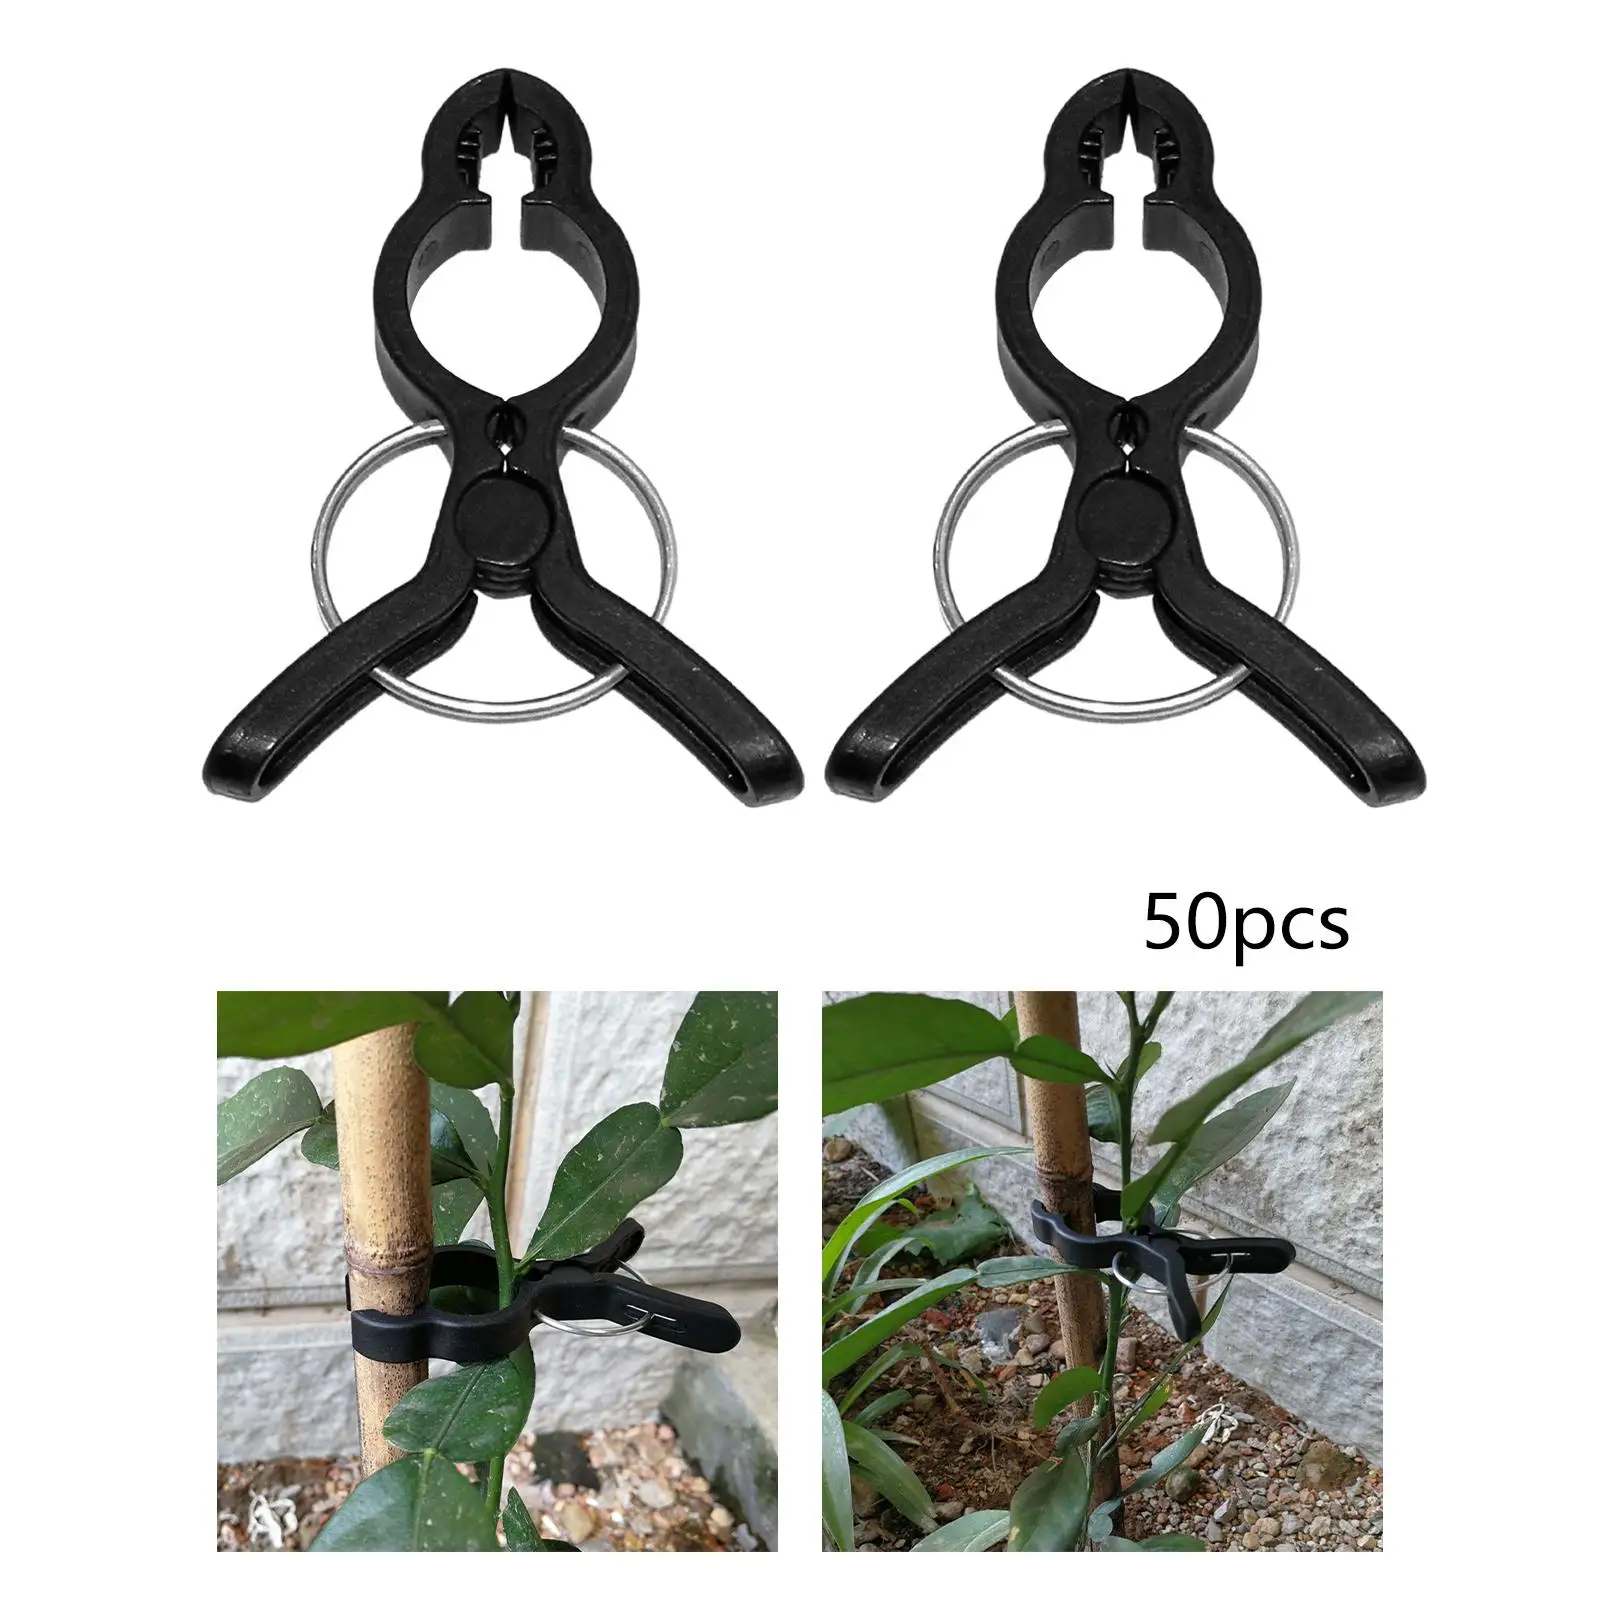 50 Pieces Garden Plant Clips Portable Plant Fixing Clips Tomato Clips for Vines Grow Upright Climbing Yard Flower Vines